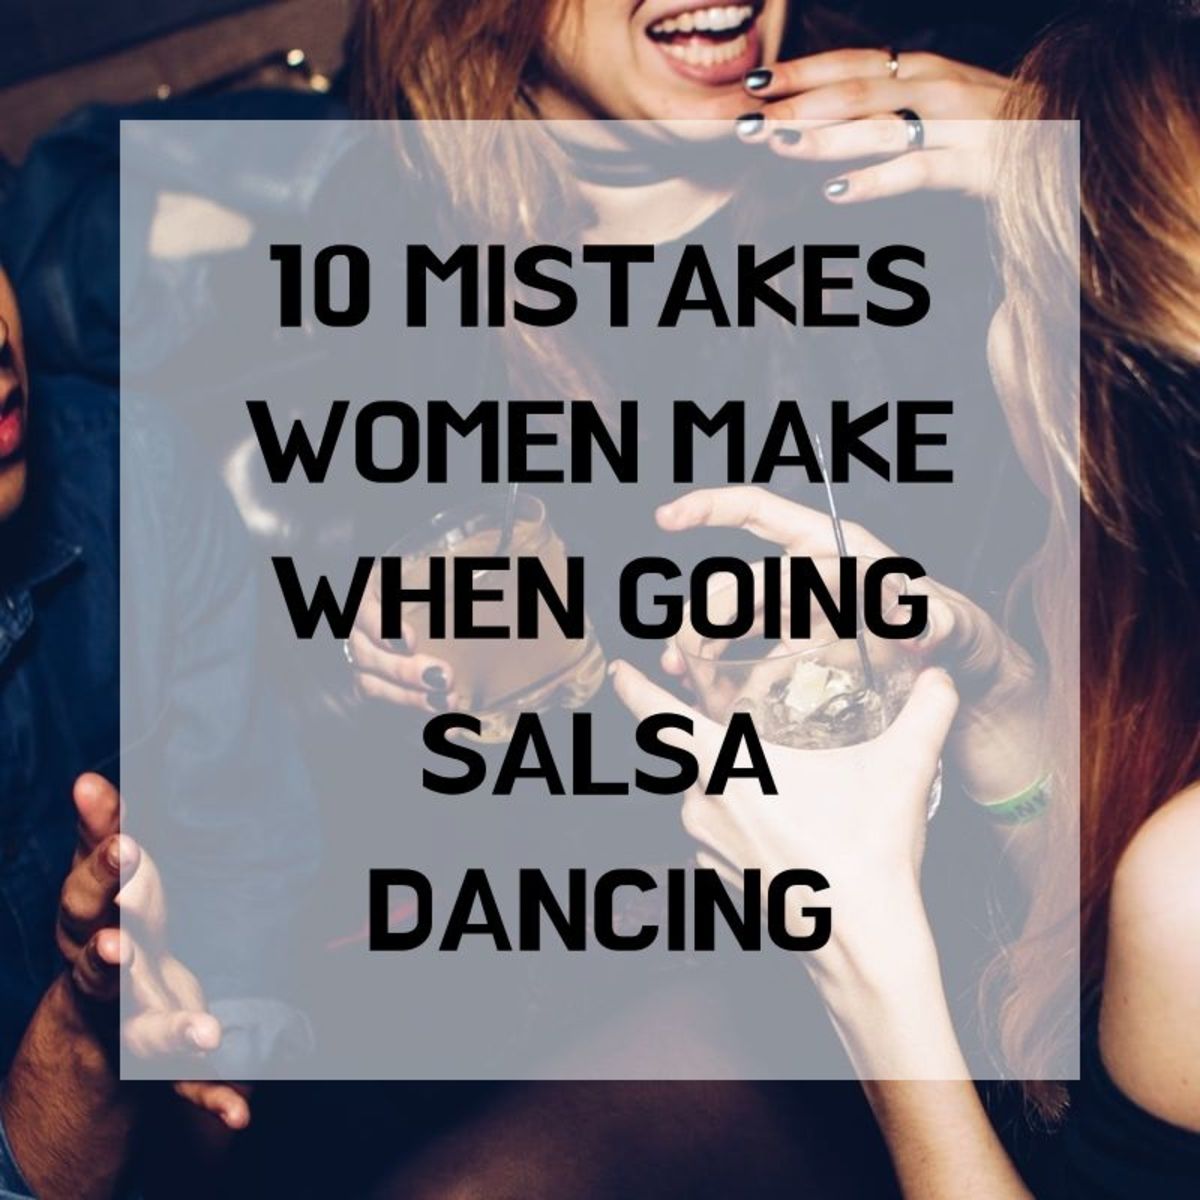 10 Common Mistakes Women Make When Going Out Salsa Dancing